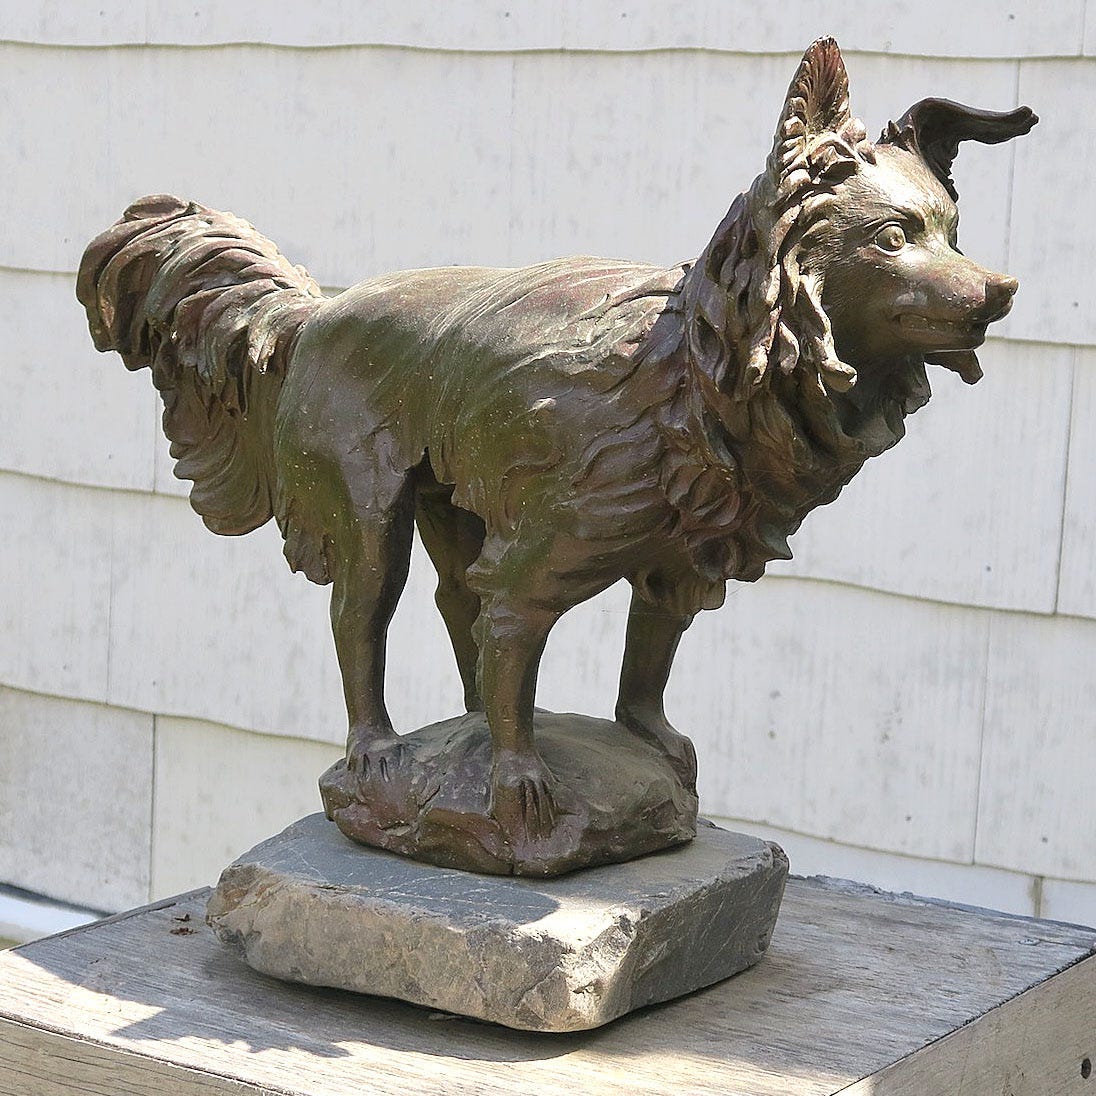 A statue of a lion

Description automatically generated with medium confidence